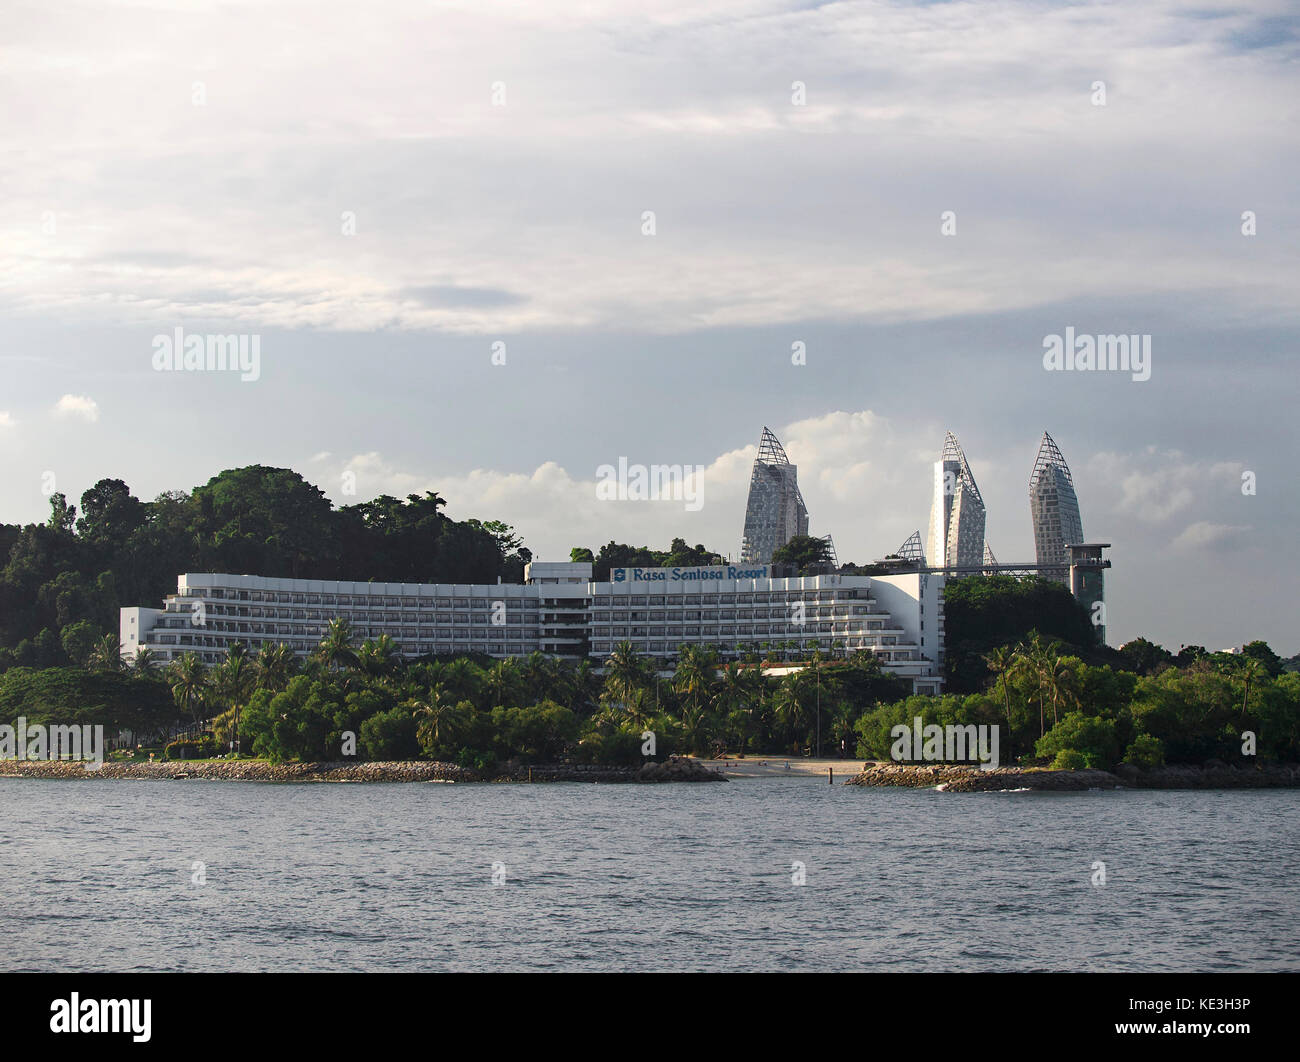 View of Rasa Sentosa Resort and Reflections at Keppel Bay from Singapore Straits, Singapore Stock Photo